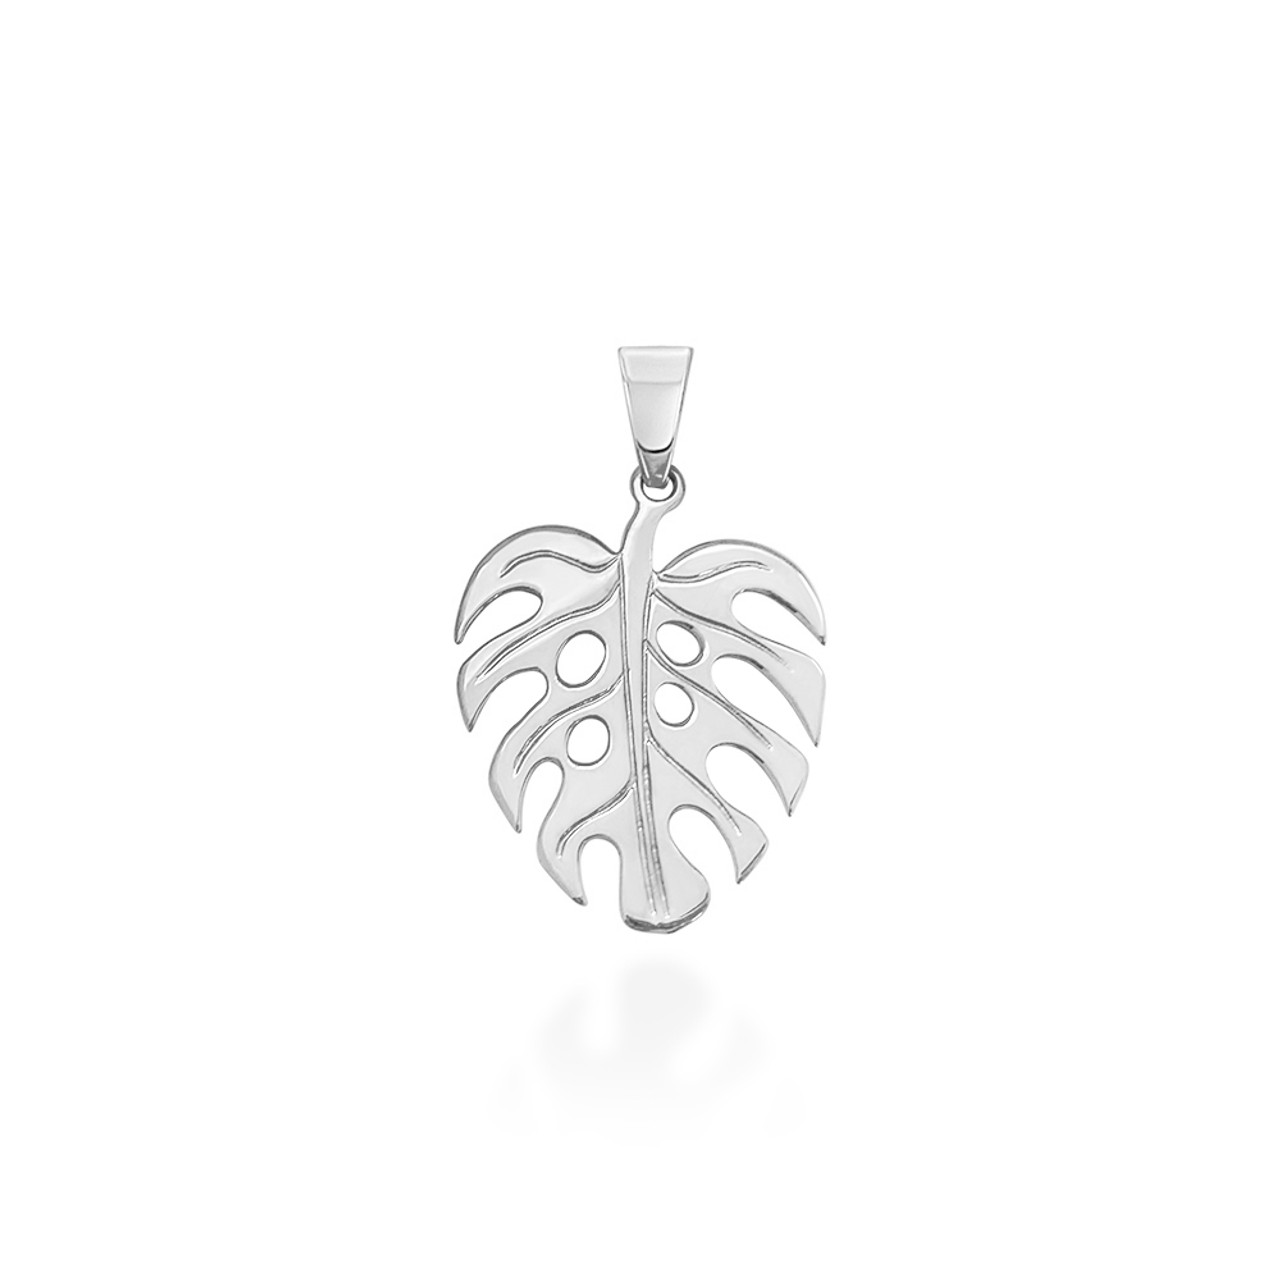 Silver Leaf Necklace / Small Realistic Silver Leaf Pendant on a